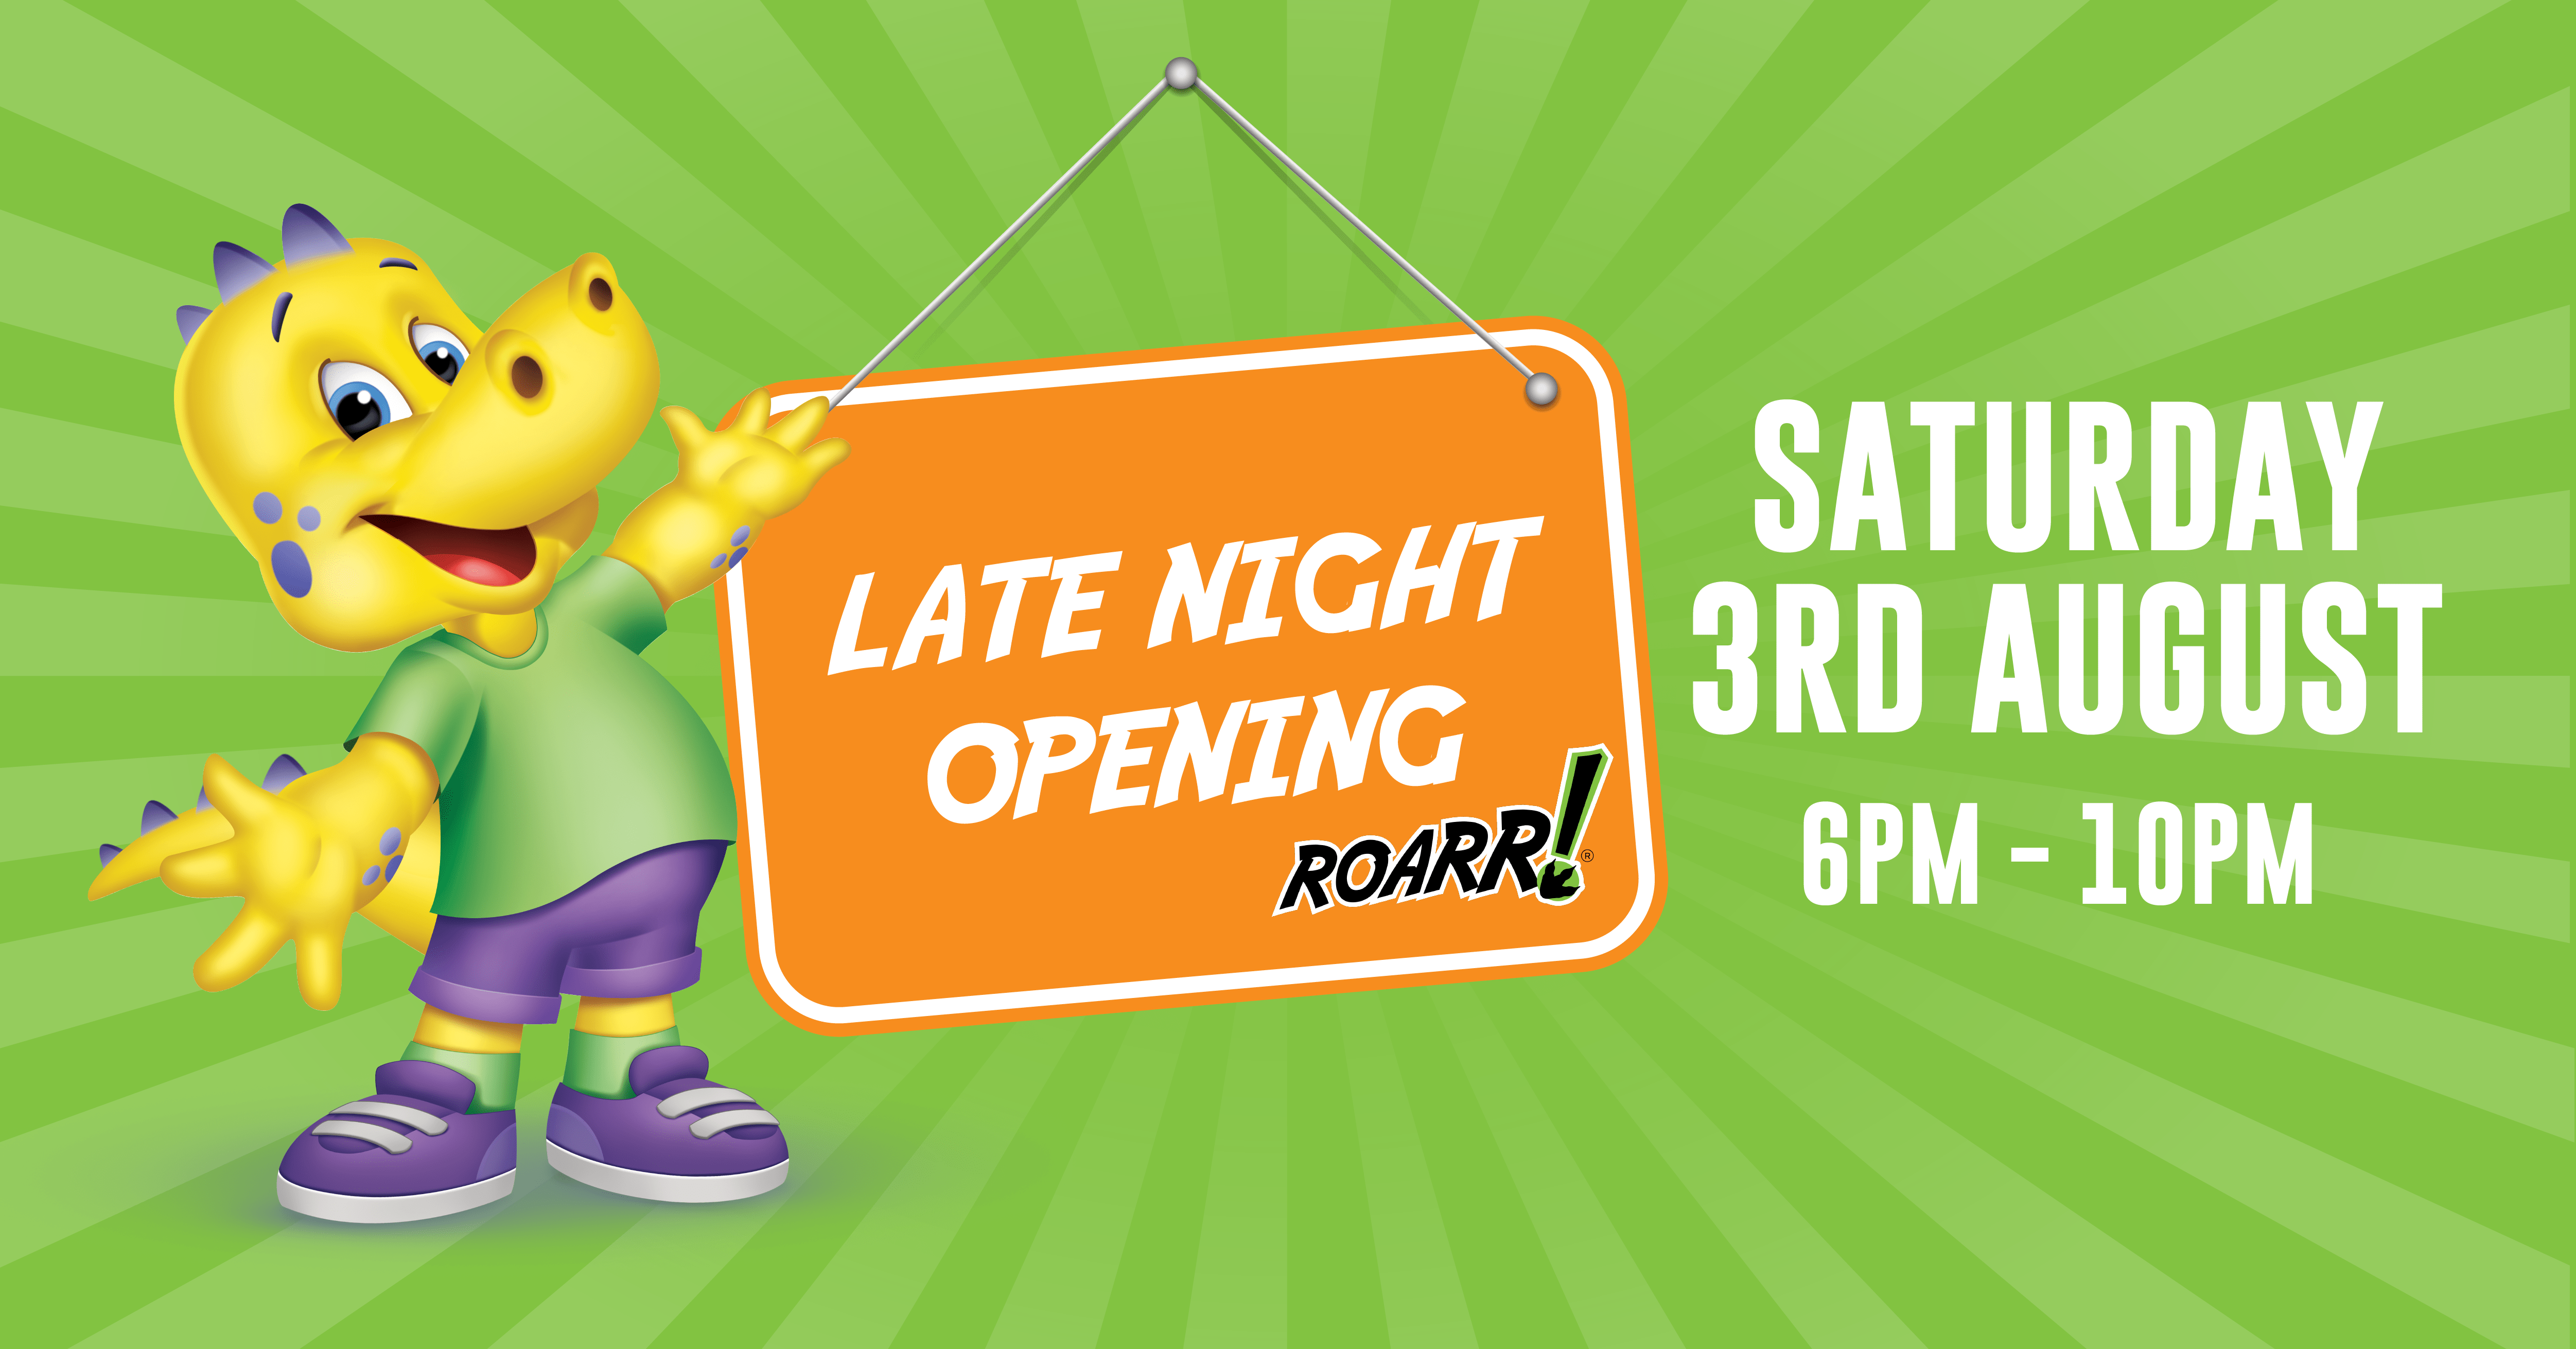 Late Night Opening at ROARR!